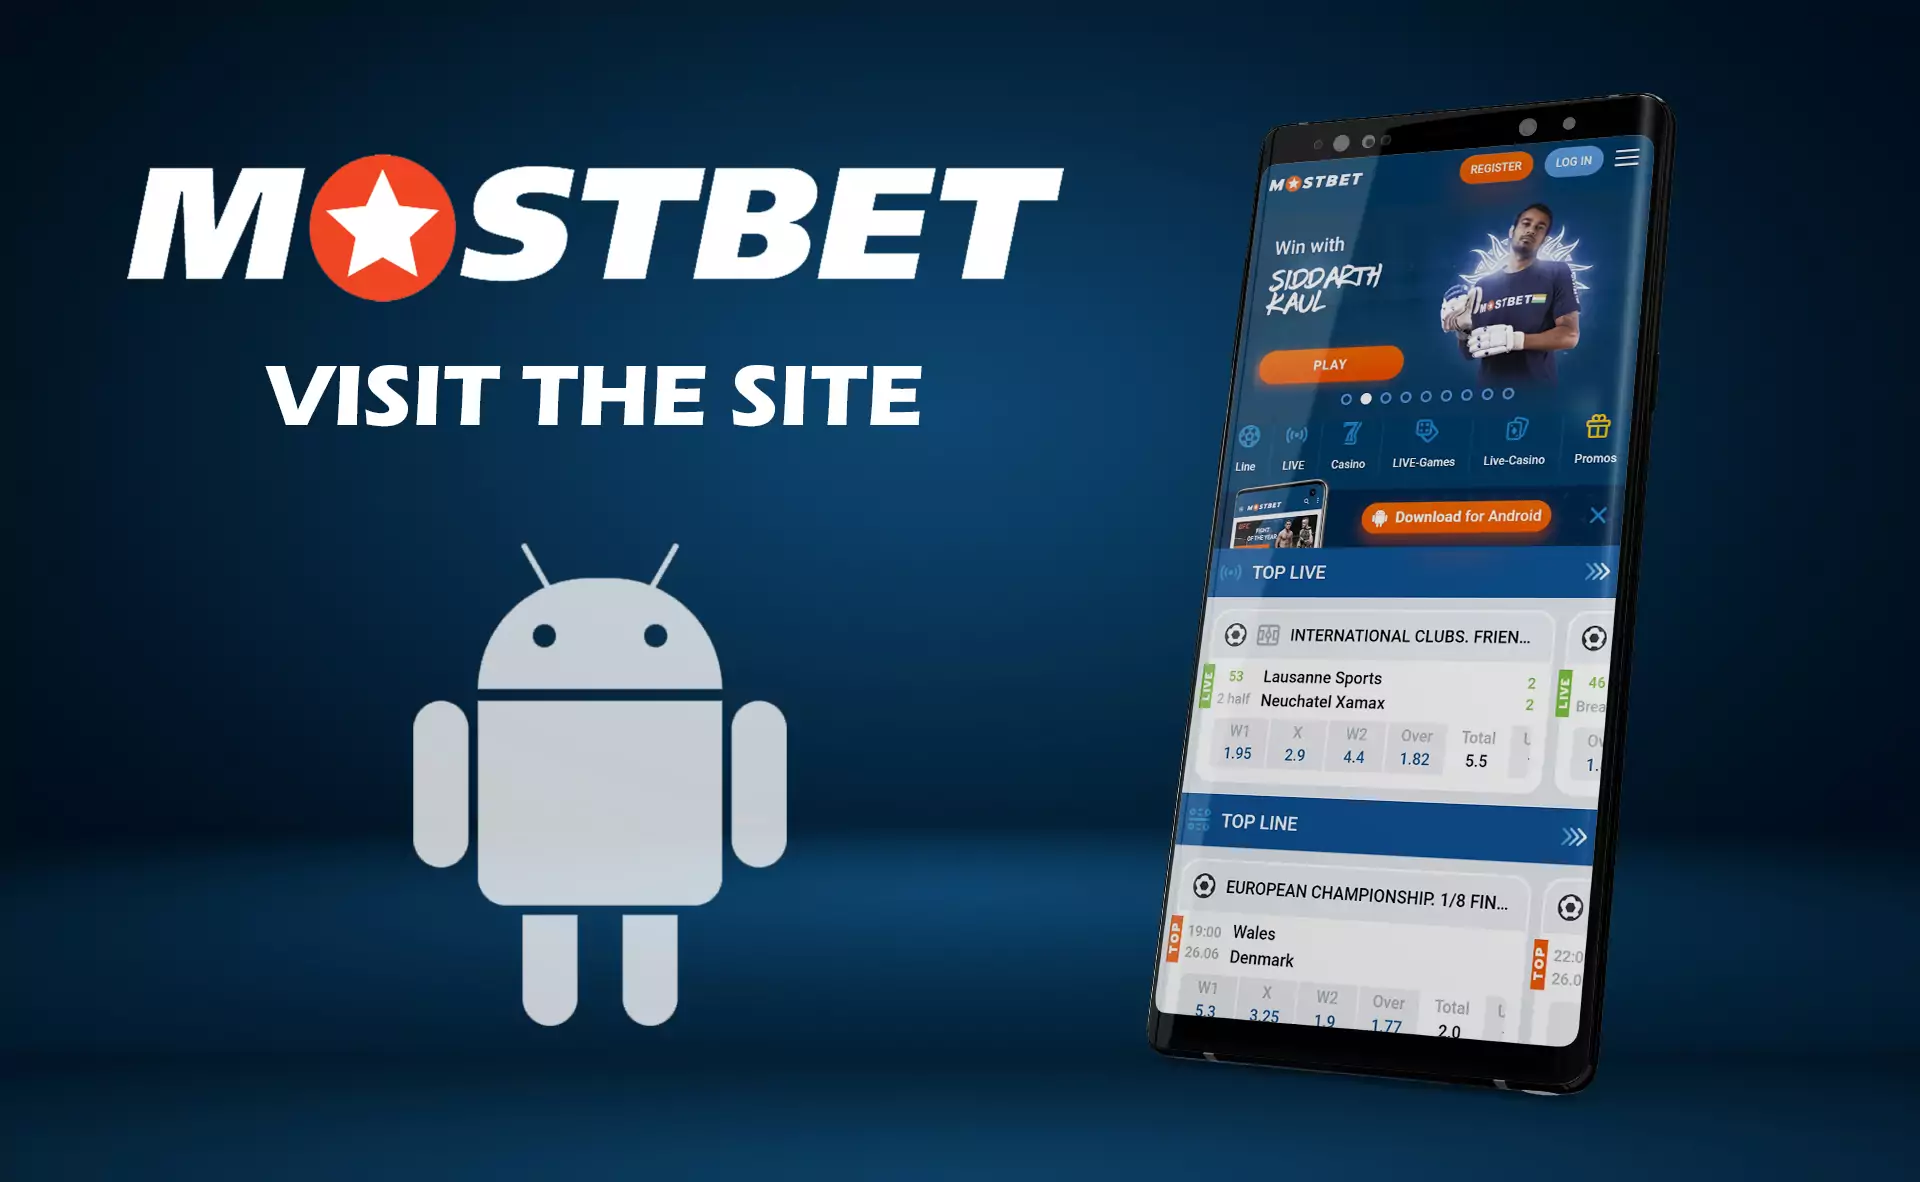 Open the homepage of the Mostbet in a mobile browser.